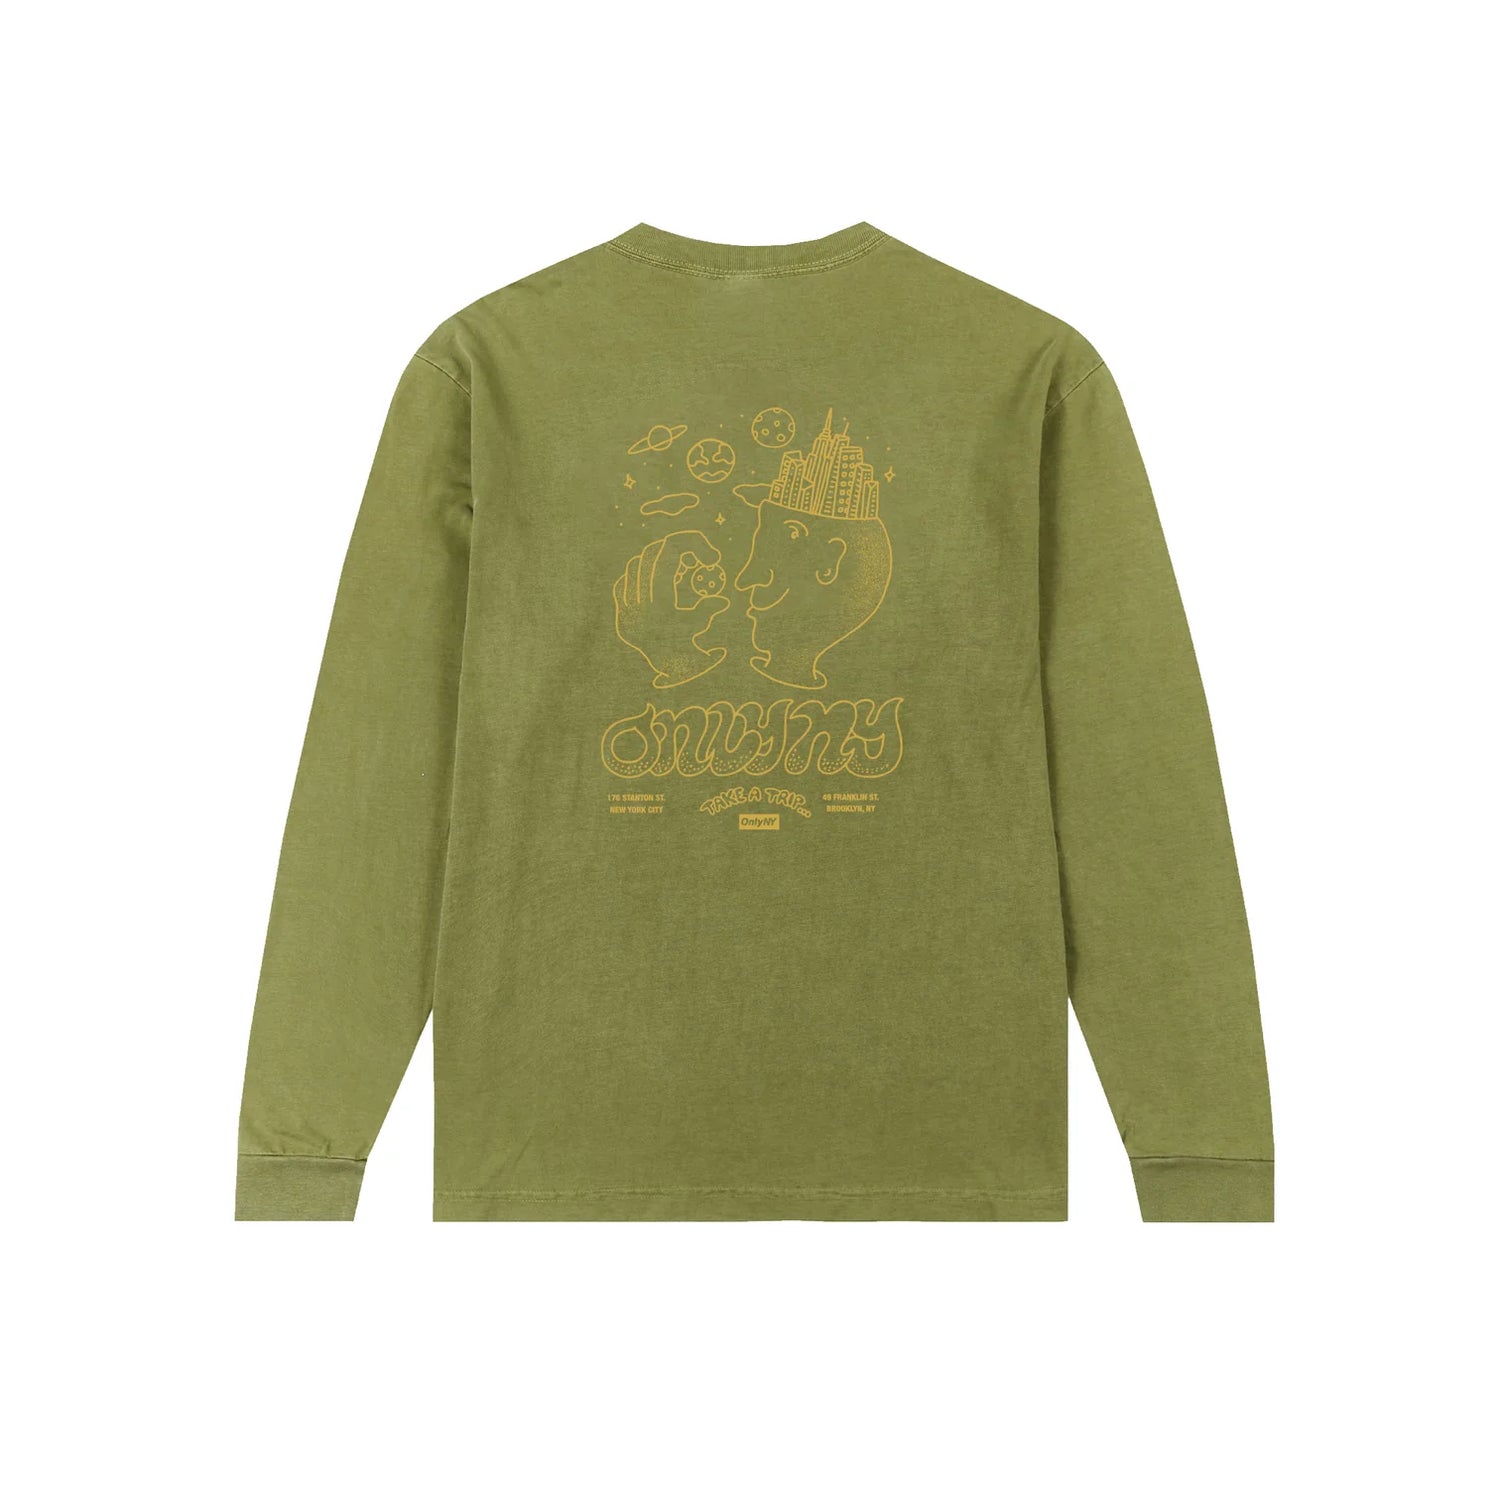 Only NY Astral Trip Long Sleeve T-Shirt - Moss Green